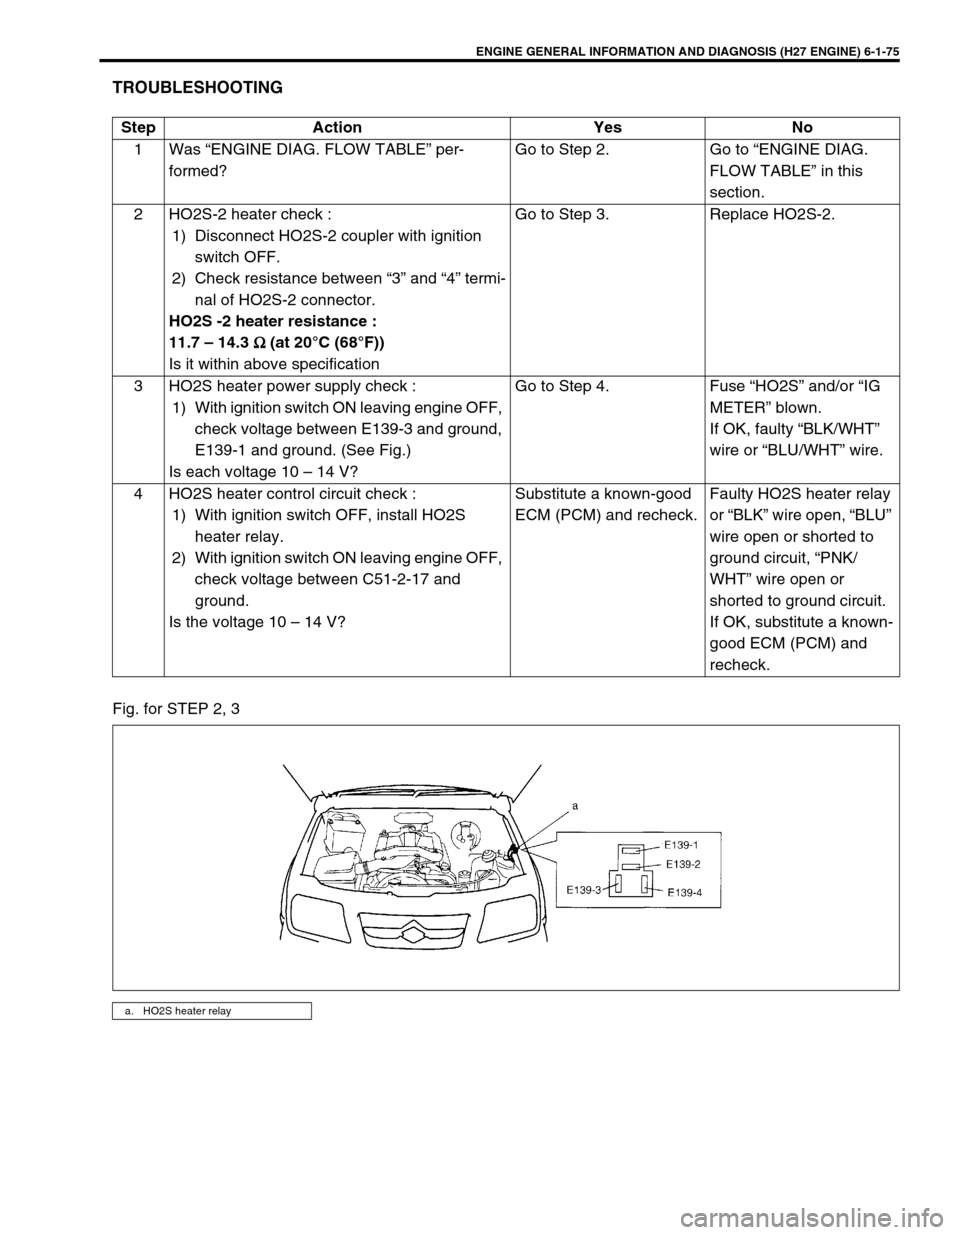 SUZUKI GRAND VITARA 1999 2.G Owners Manual ENGINE GENERAL INFORMATION AND DIAGNOSIS (H27 ENGINE) 6-1-75
TROUBLESHOOTING
Fig. for STEP 2, 3Step Action Yes No
1 Was “ENGINE DIAG. FLOW TABLE” per-
formed?Go to Step 2. Go to “ENGINE DIAG. 
F